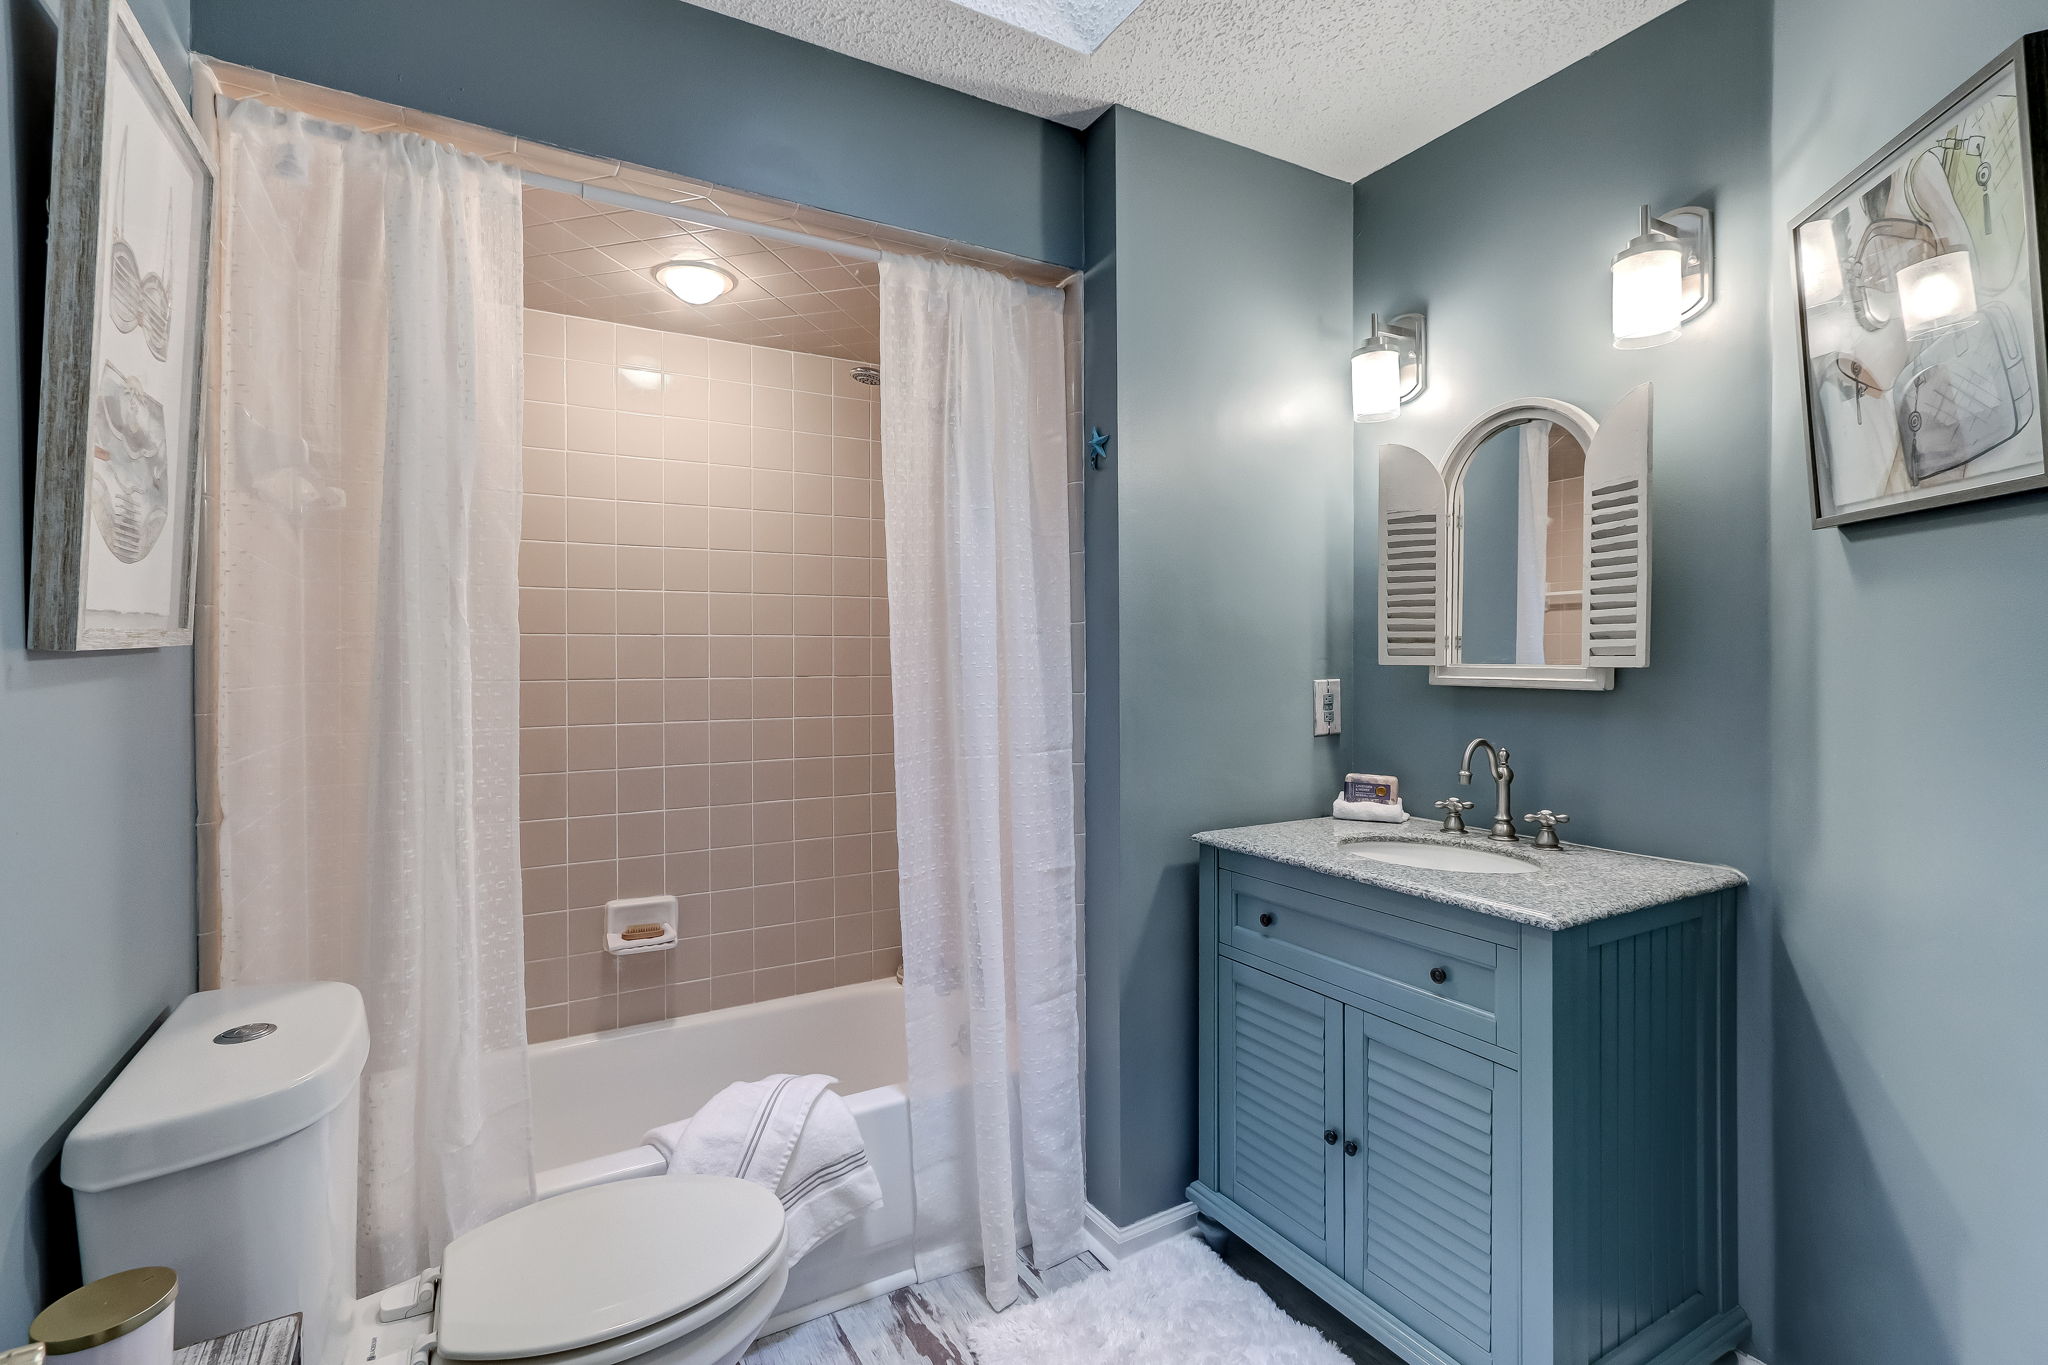 The guest bath features a tub/shower combo with updated vanity and fixtures